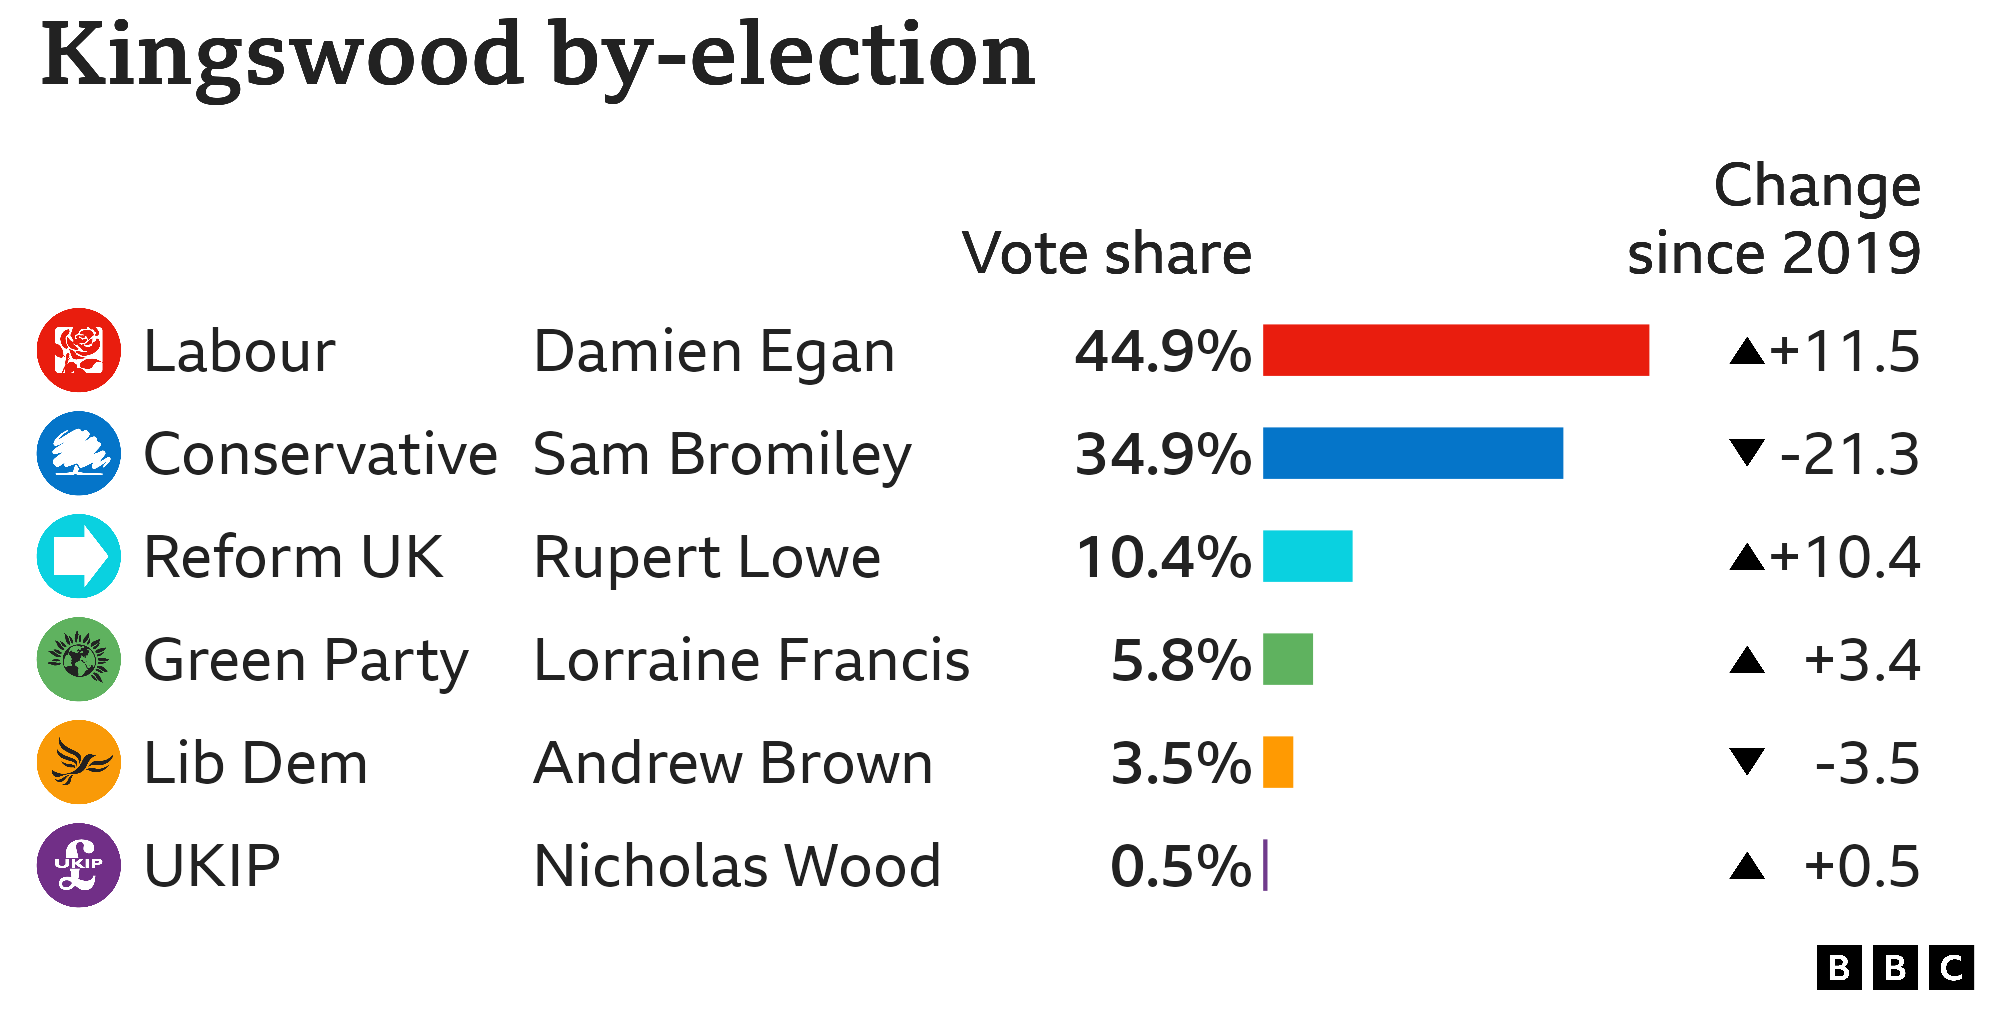 Bar chart showing the results of the Kingswood by-election with vote share for the top six parties: Labour 44.9% up 11.5 points, Conservative 34.9% down 21.3 points, Reform UK 10.4% up 10.4 points, Green Party 5.8% up 3.4 points, Lib Dem 3.5% down 3.5 points, UKIP 0.5% up 0.5 points